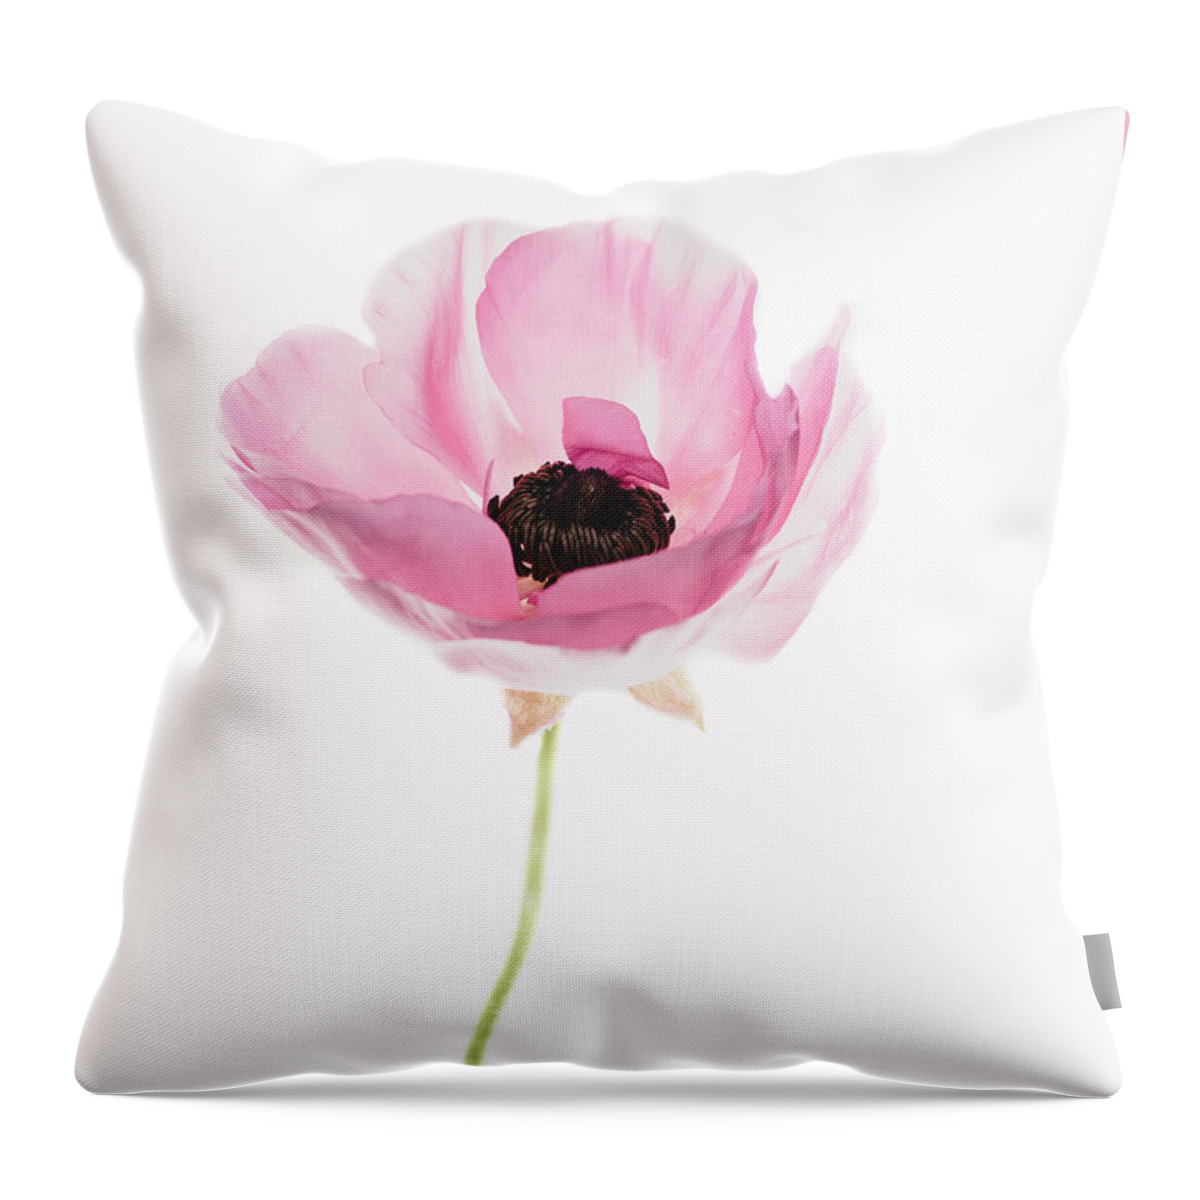 Ranunculus Throw Pillow featuring the photograph One Pink Beauty by Rebecca Cozart